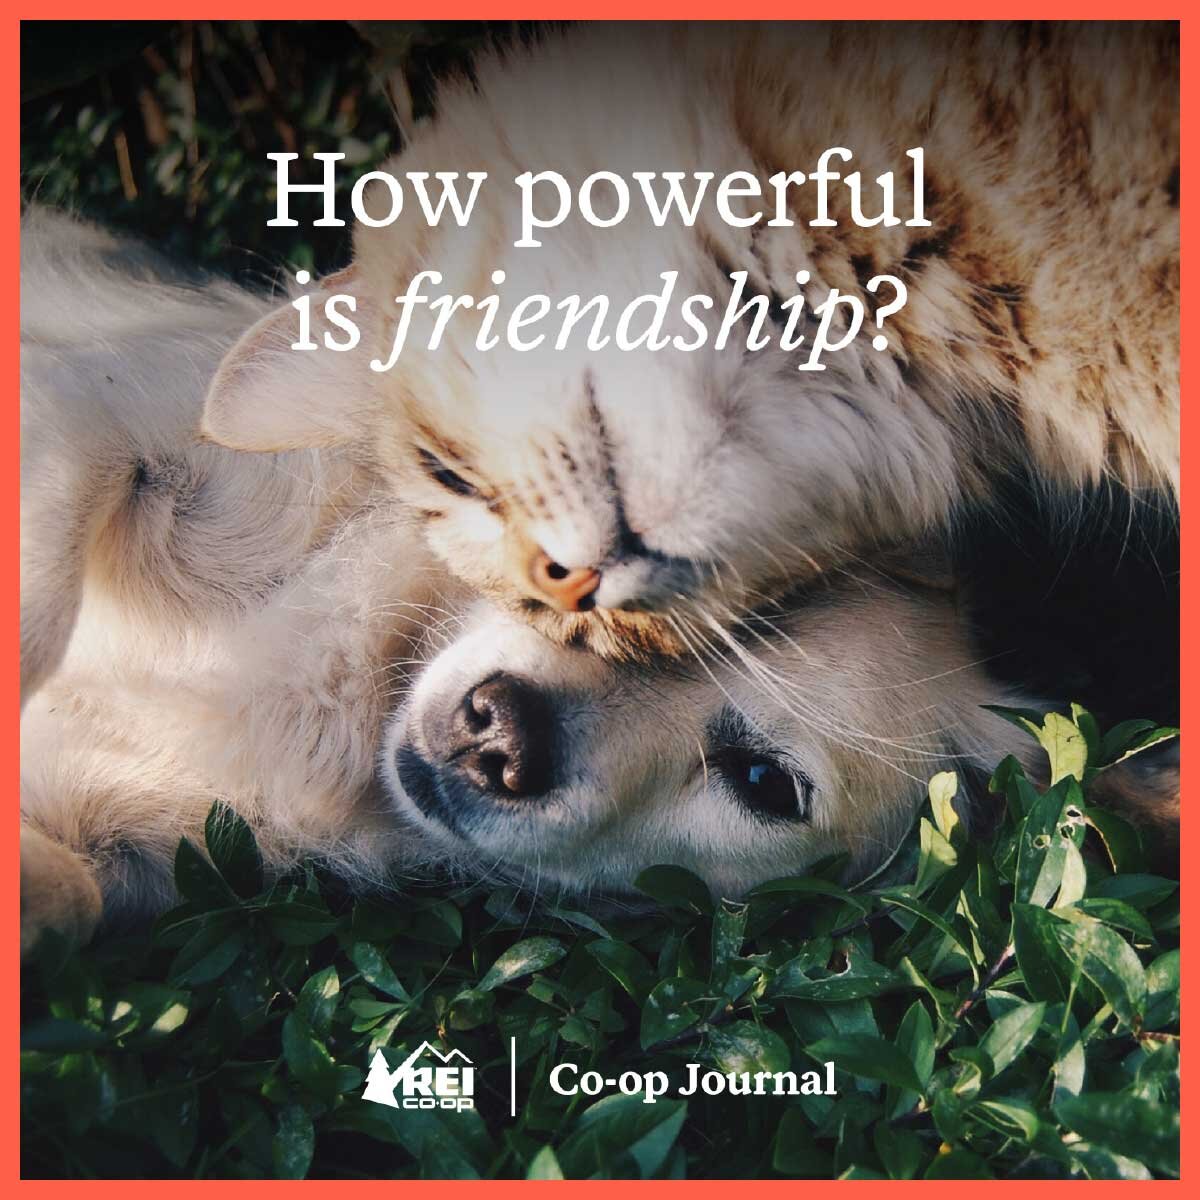 How powerful is friendship?